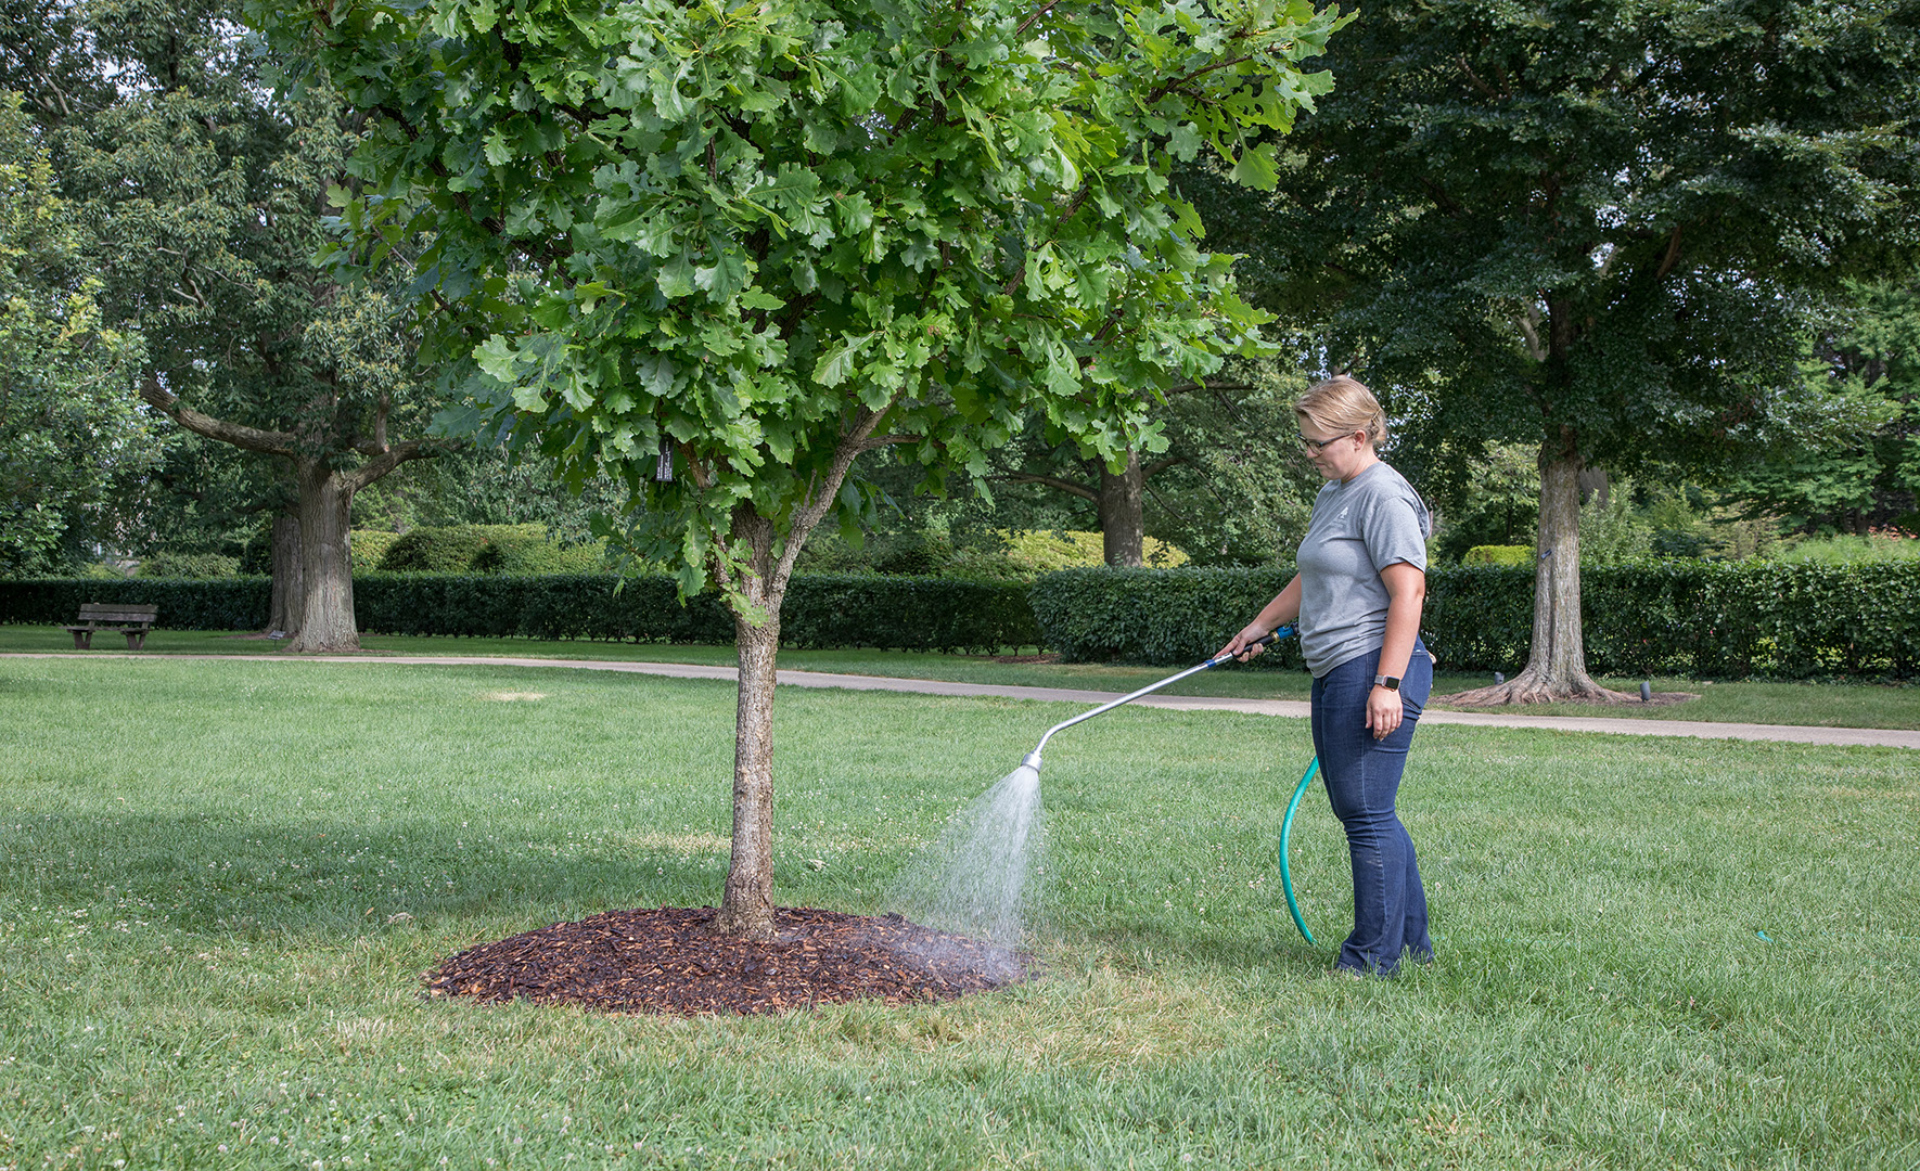 Watering a tree with a hose